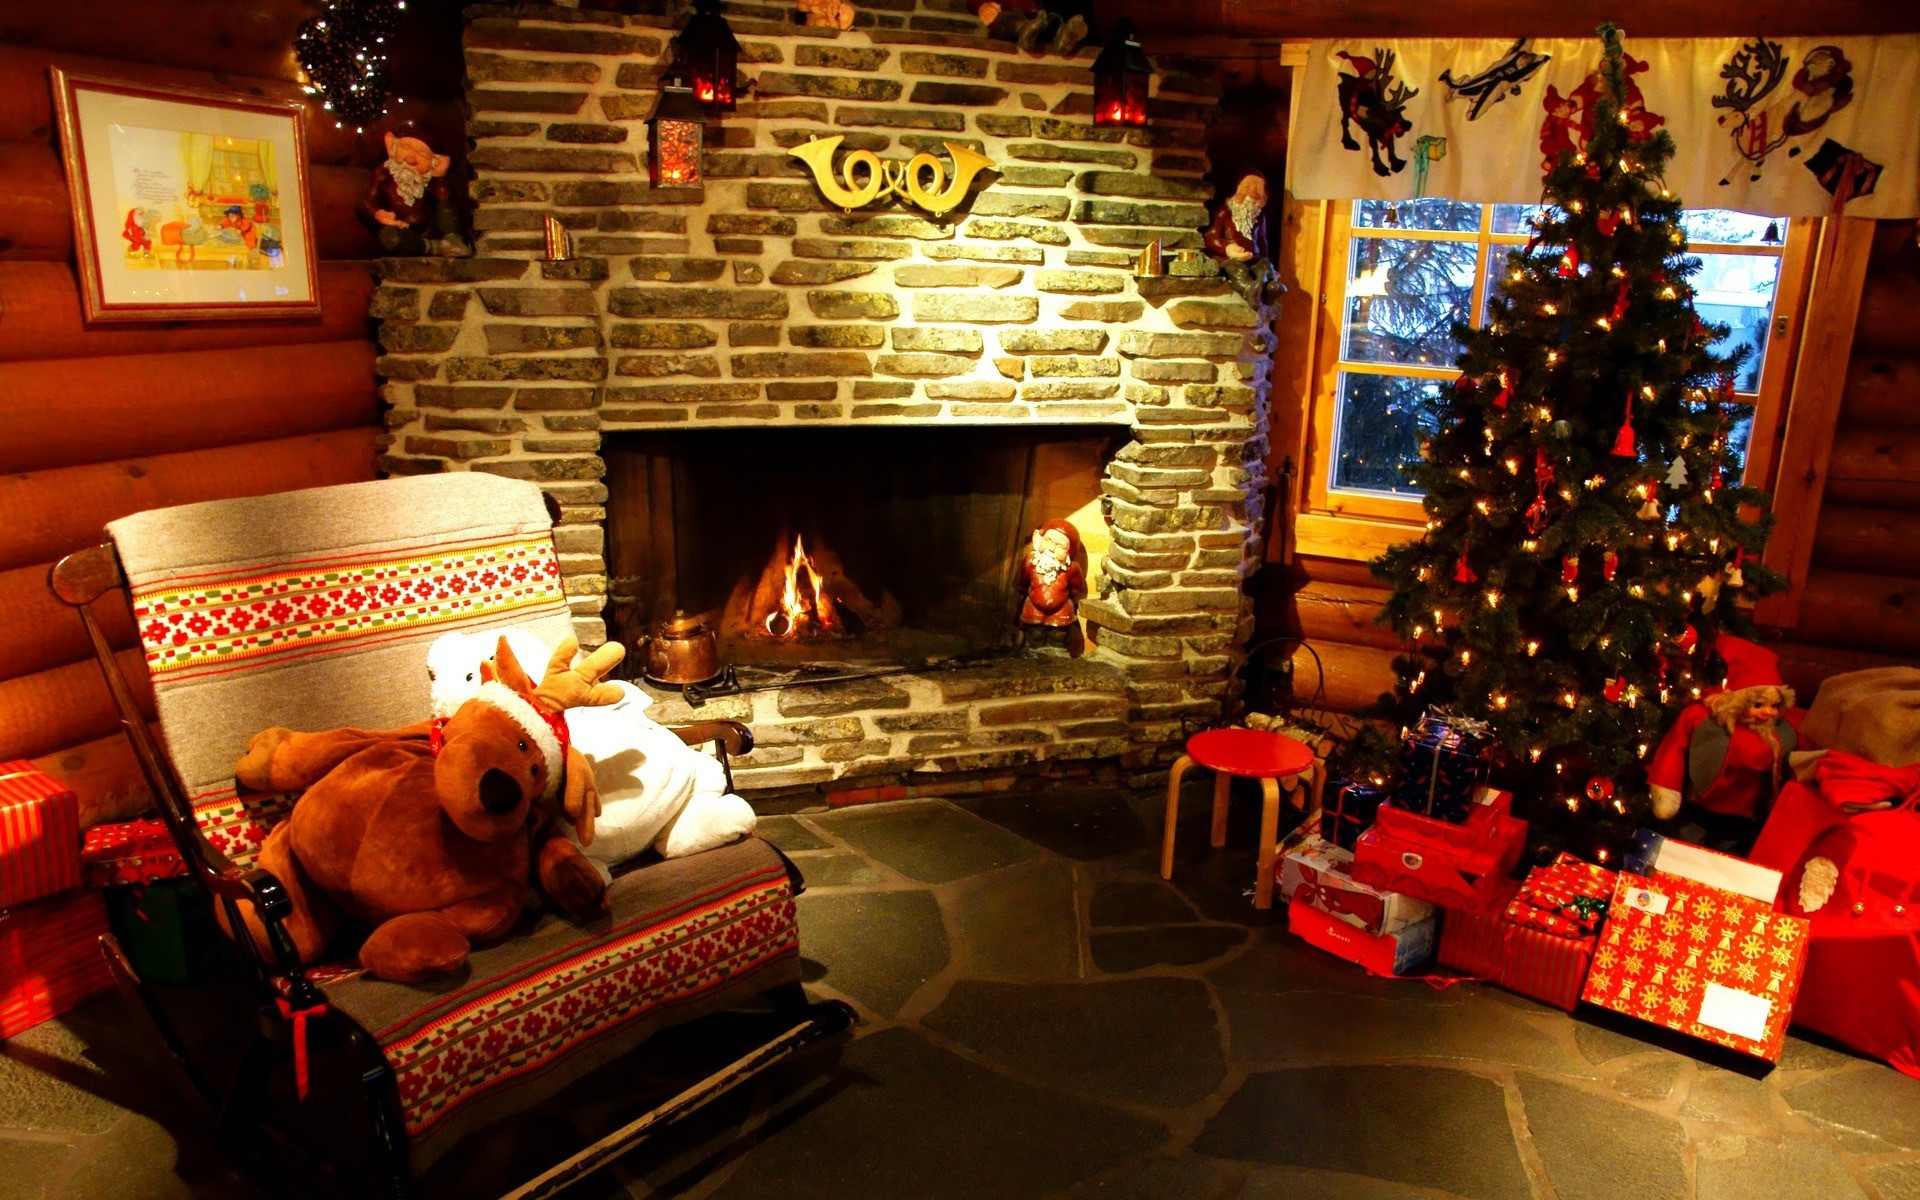 Christmas Tree Fireplace Wallpaper
 The Warmth Christmas on Pinterest